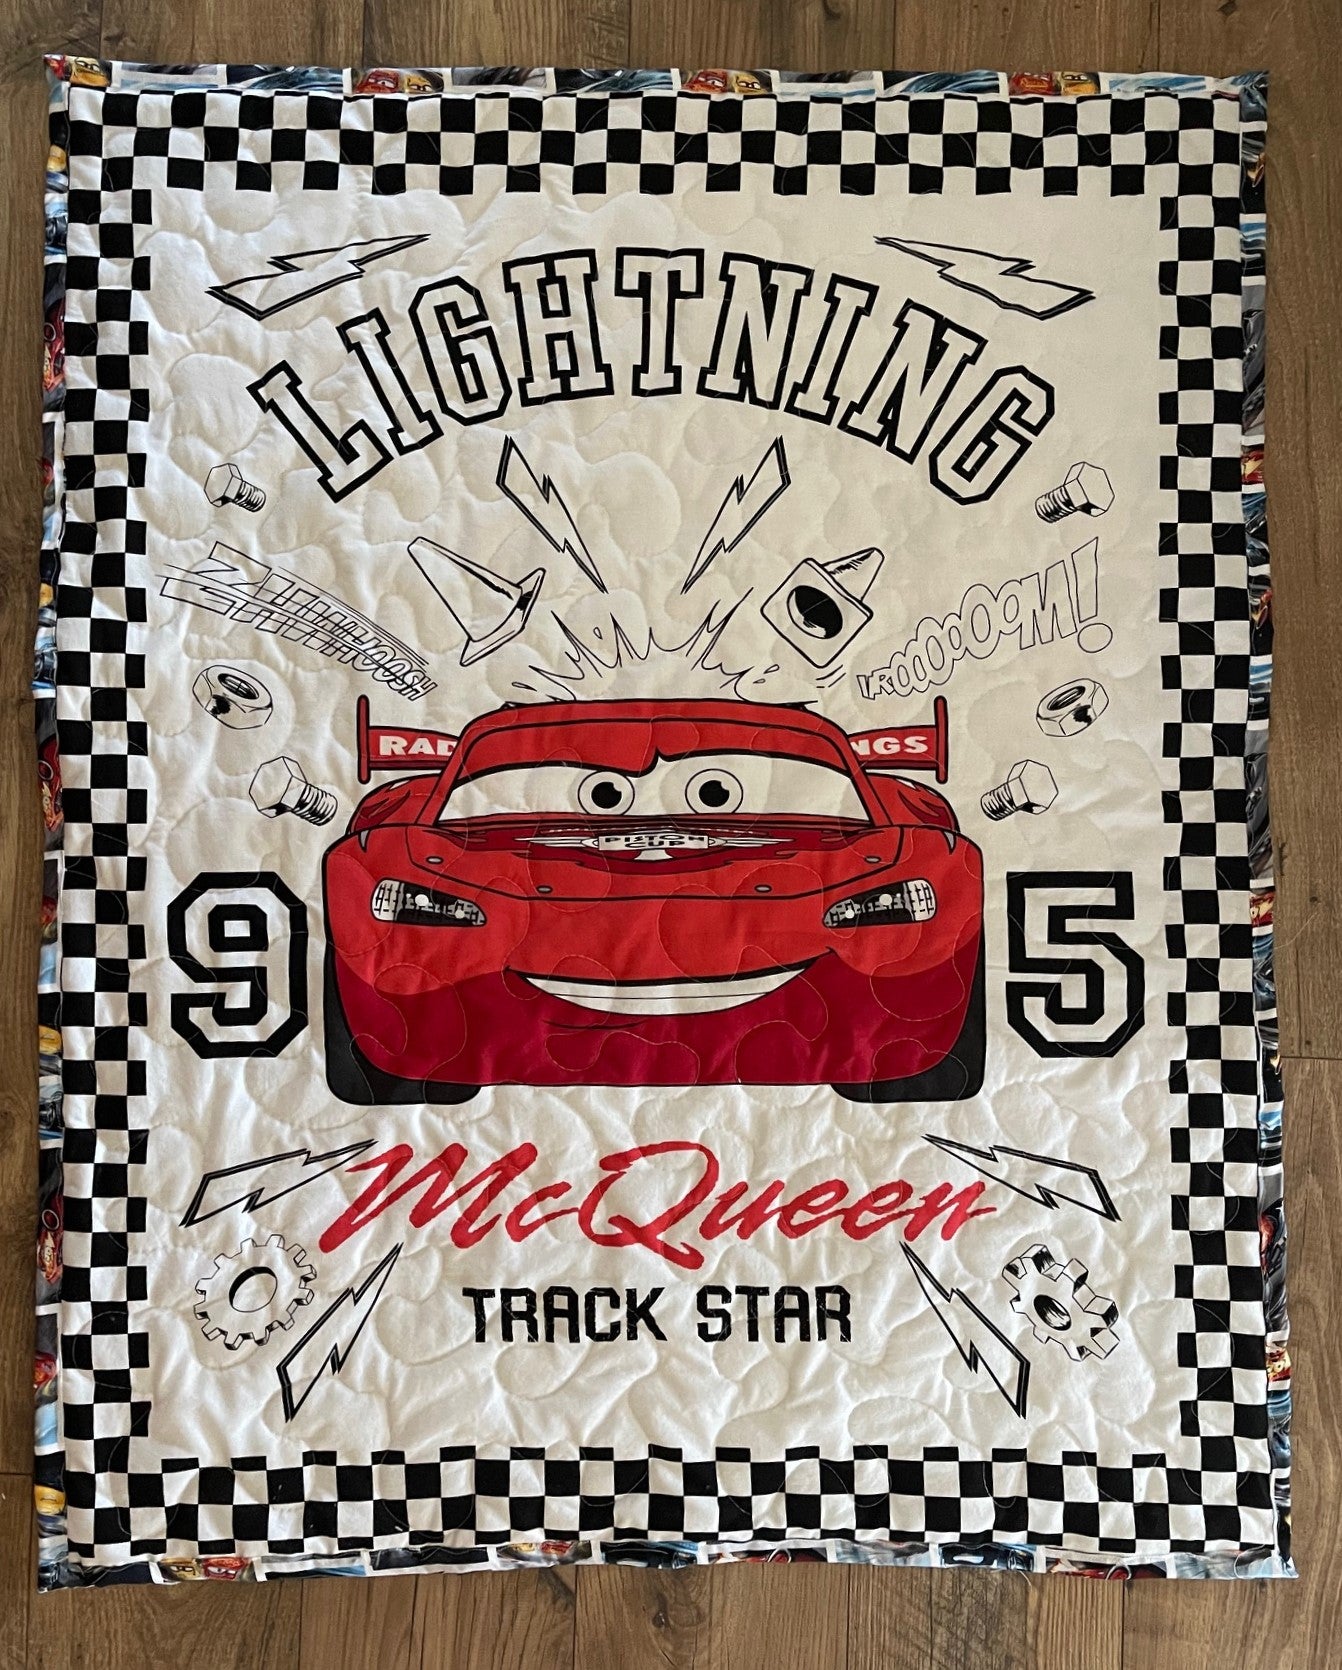 CARS LGHTNING MC QUEEN 95 INSPIRED 36"X44" Quilted Blanket  TRACK STAR Reversible Blanket